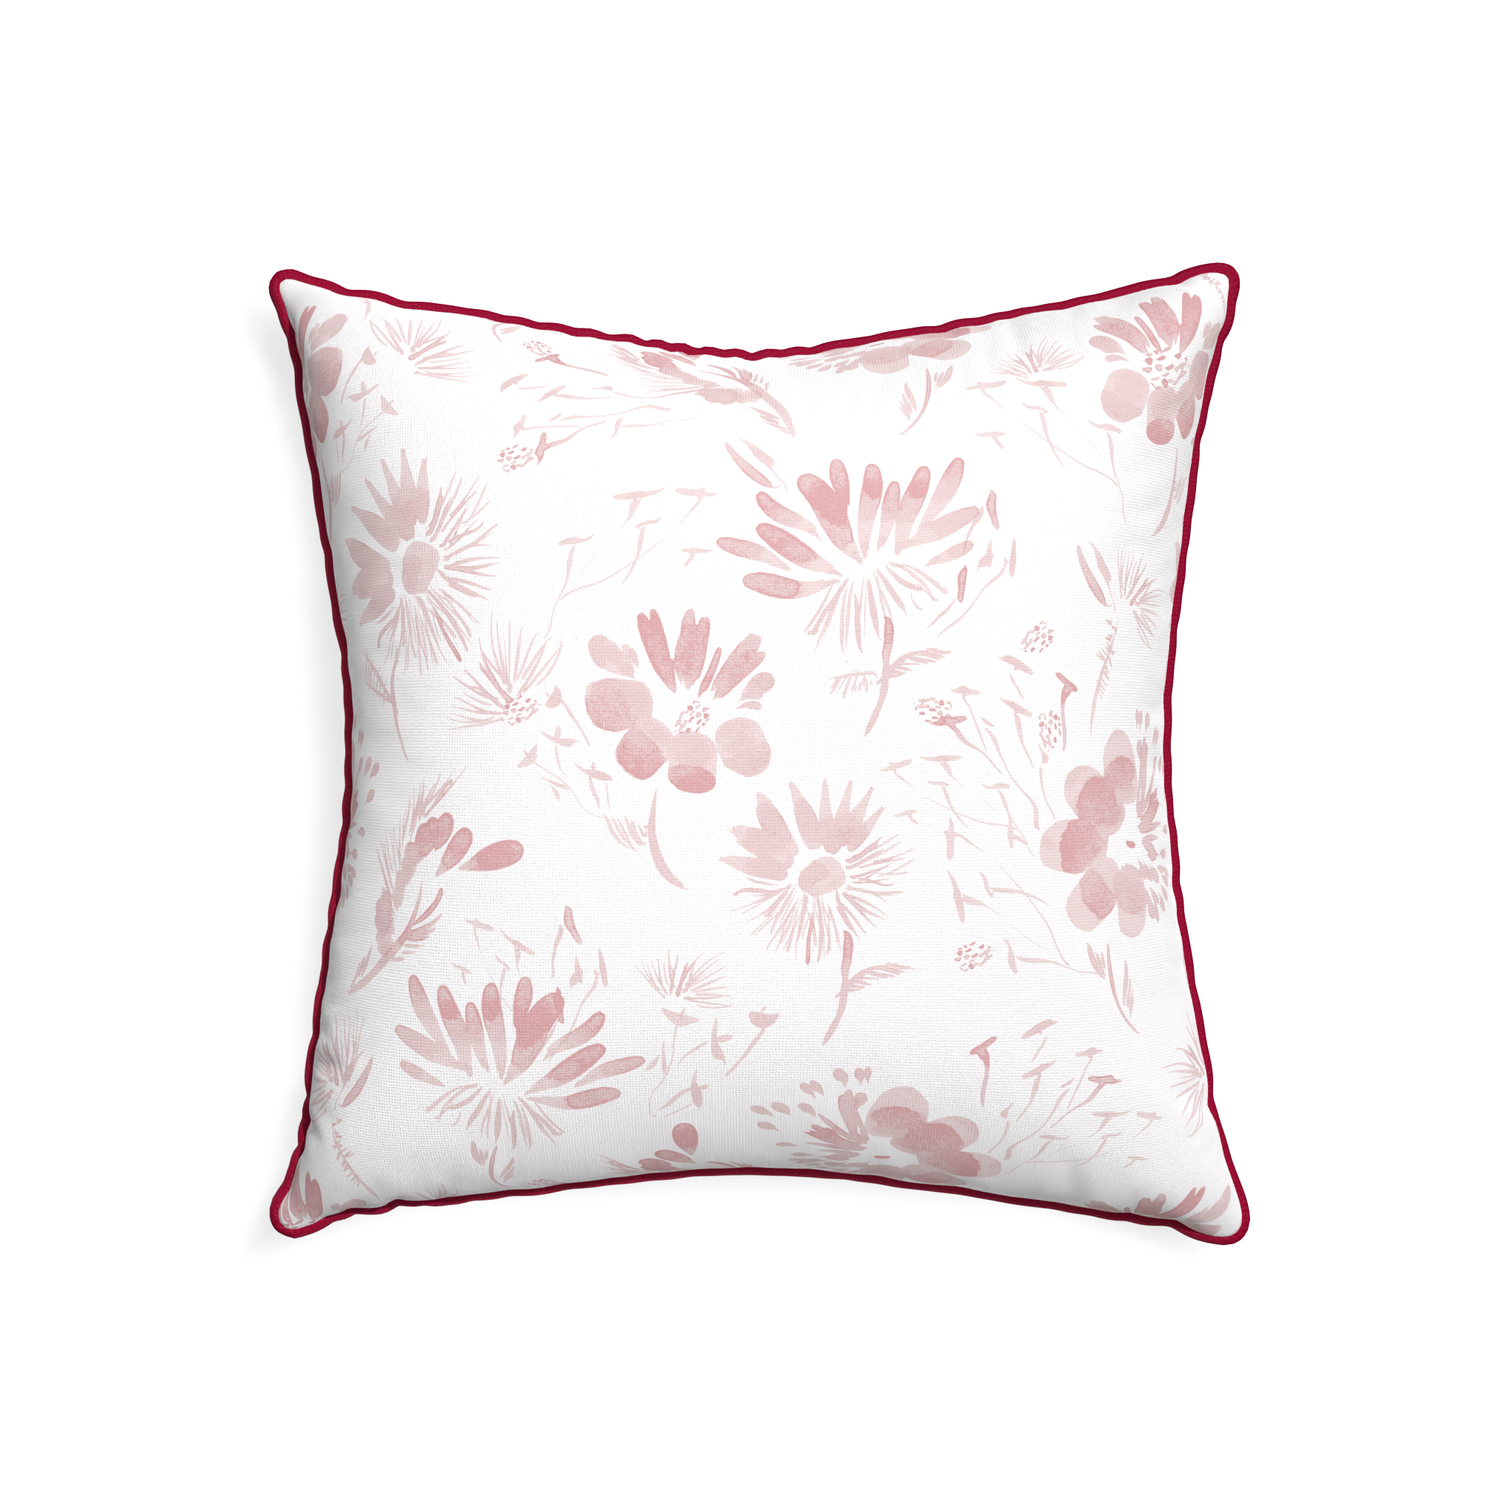 22-square blake custom pillow with raspberry piping on white background